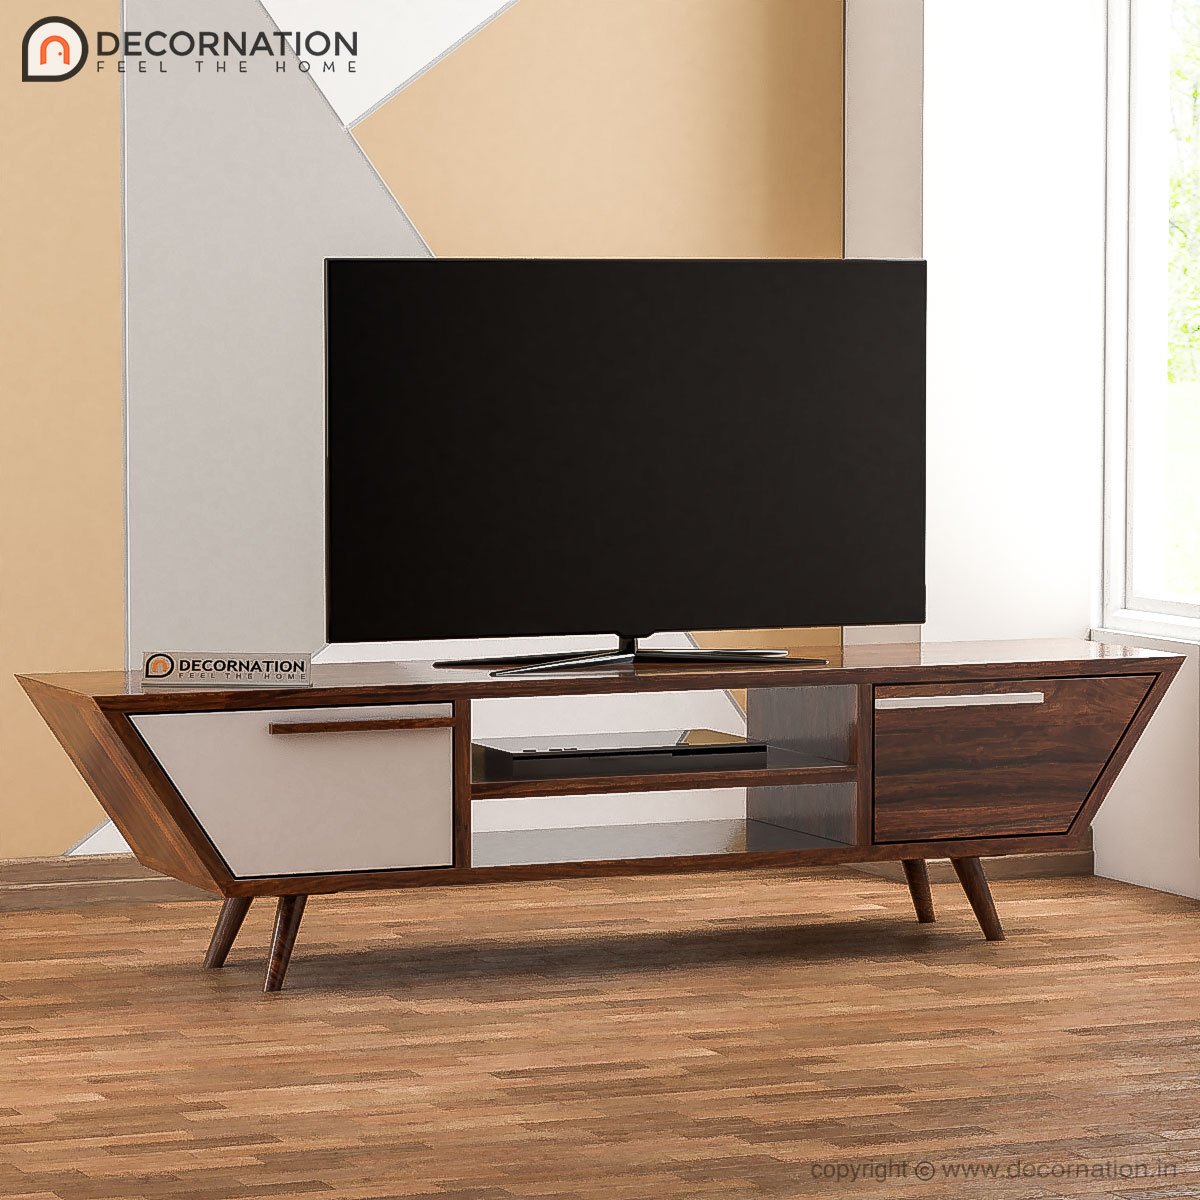 Philo Wood Storage TV Table with 2 Drawers and Shelf – Natural Finish